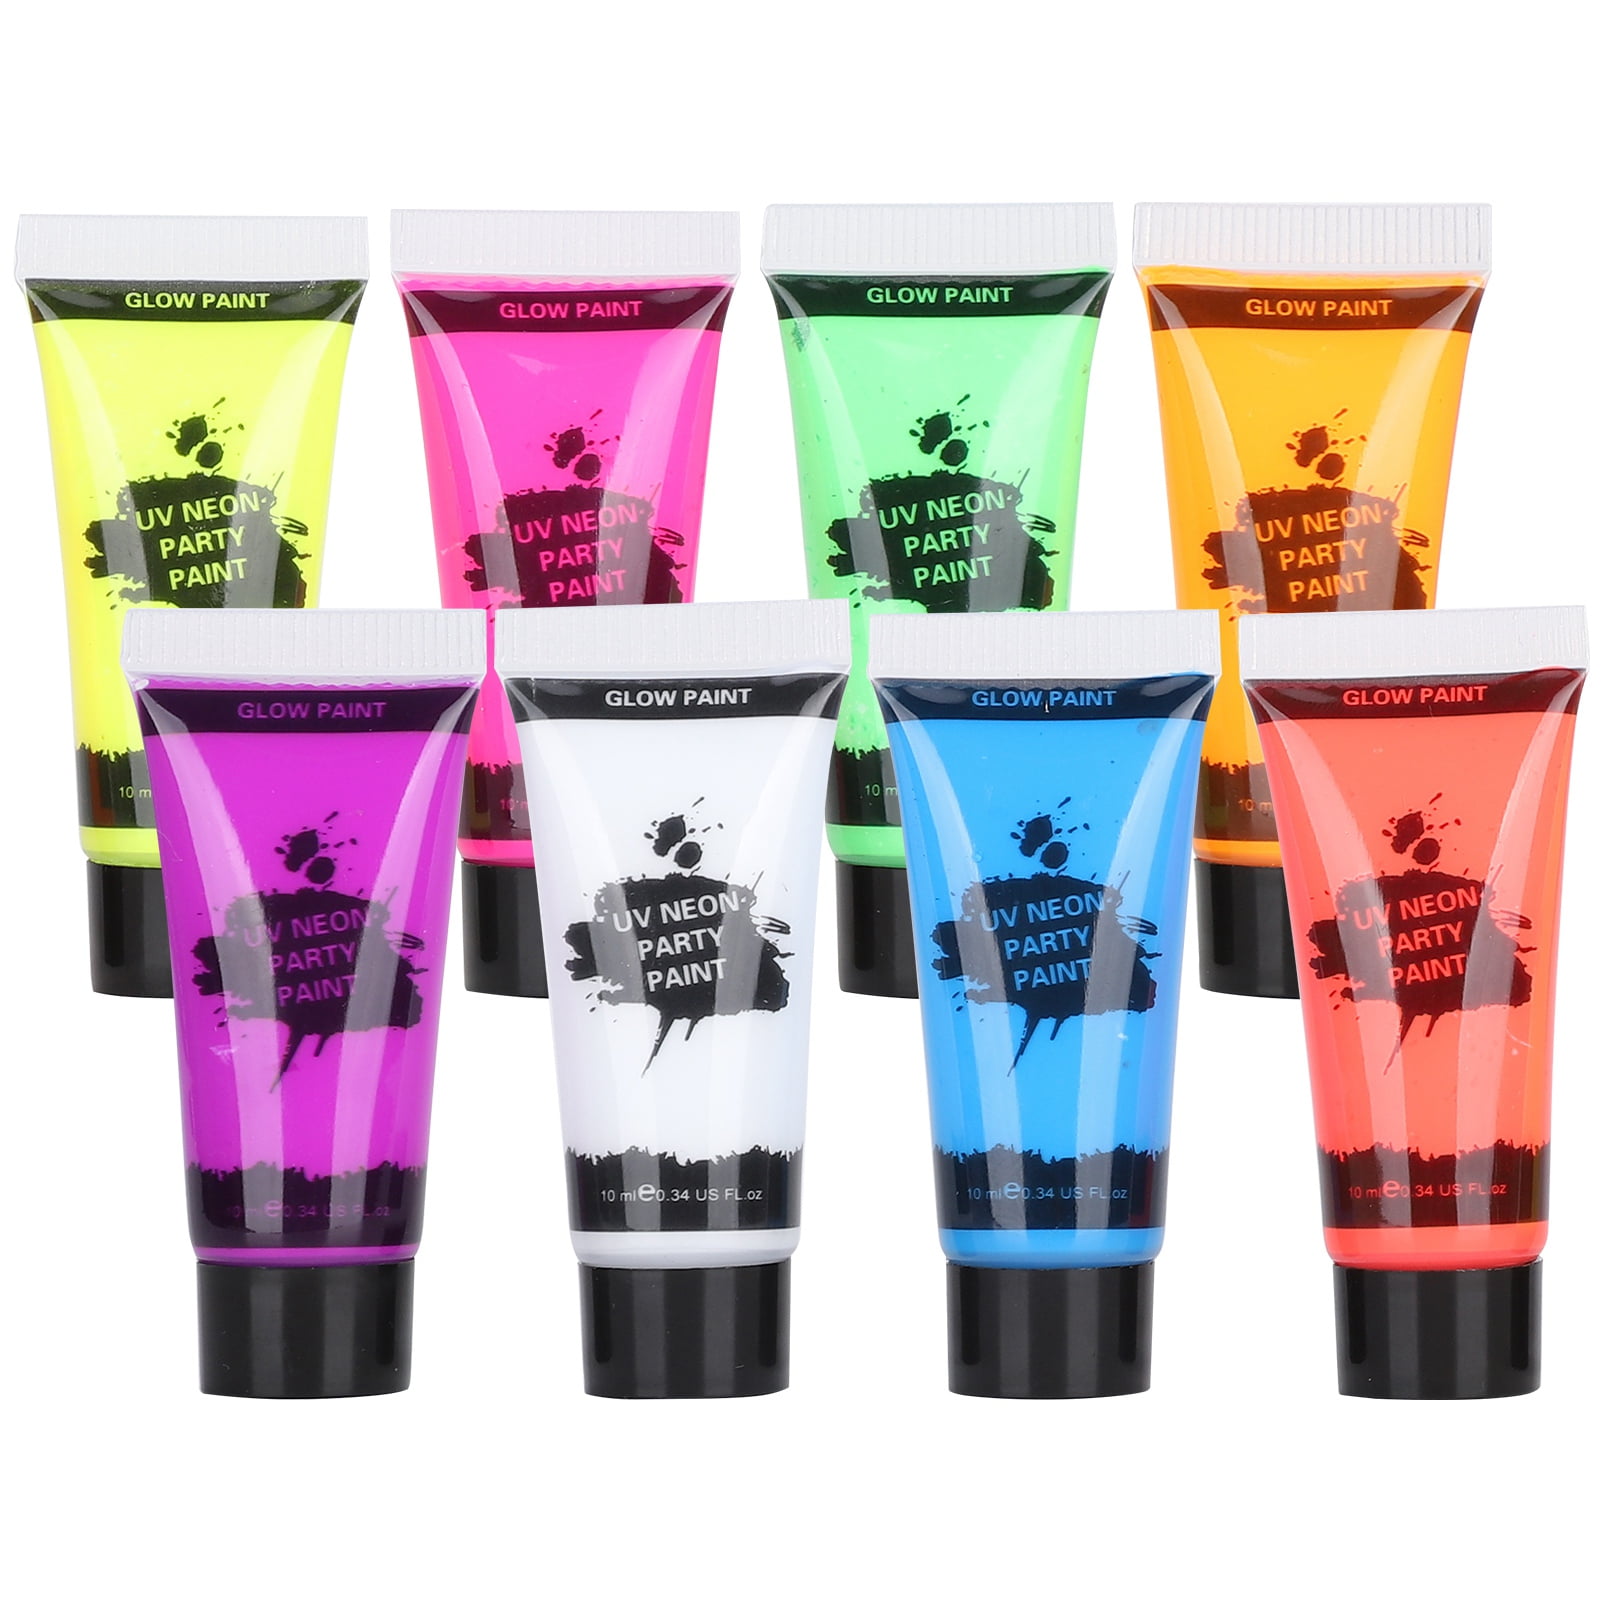 Body Paint Glow in The Dark UV Neon Blacklight Face Paint Makeup with 0.4oz Set of 8 Tubes 6 Art Brushes and 1 Palette for Adults Music Festivals